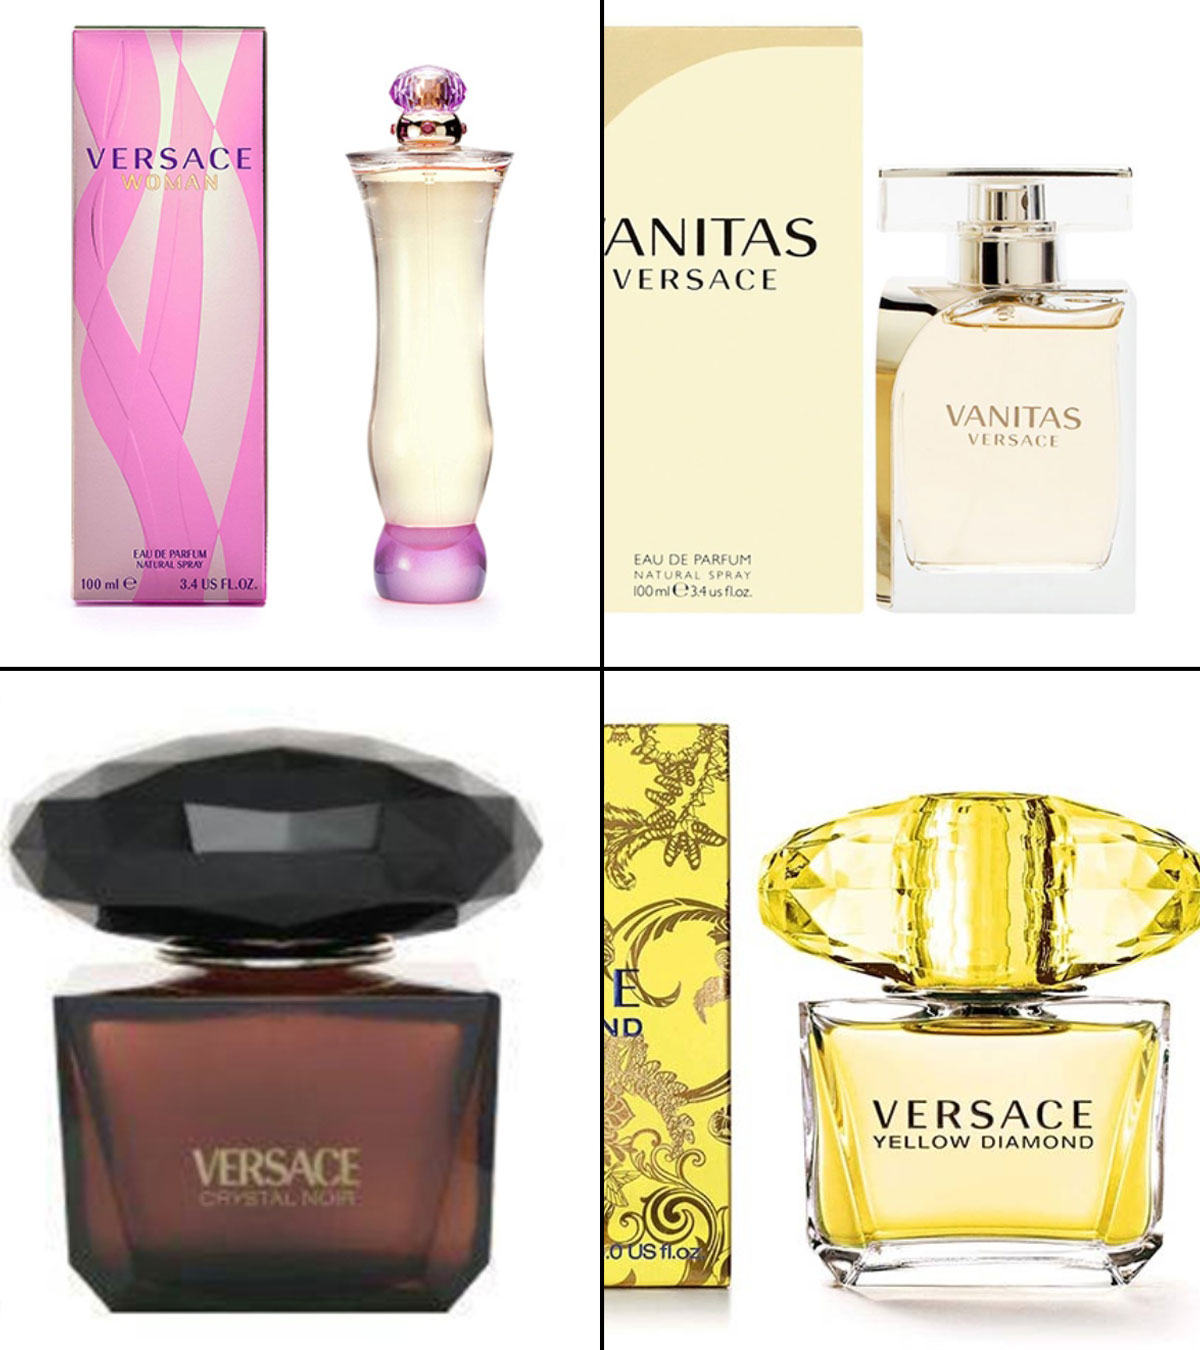 10 Best Versace Perfumes For Women Reviewed